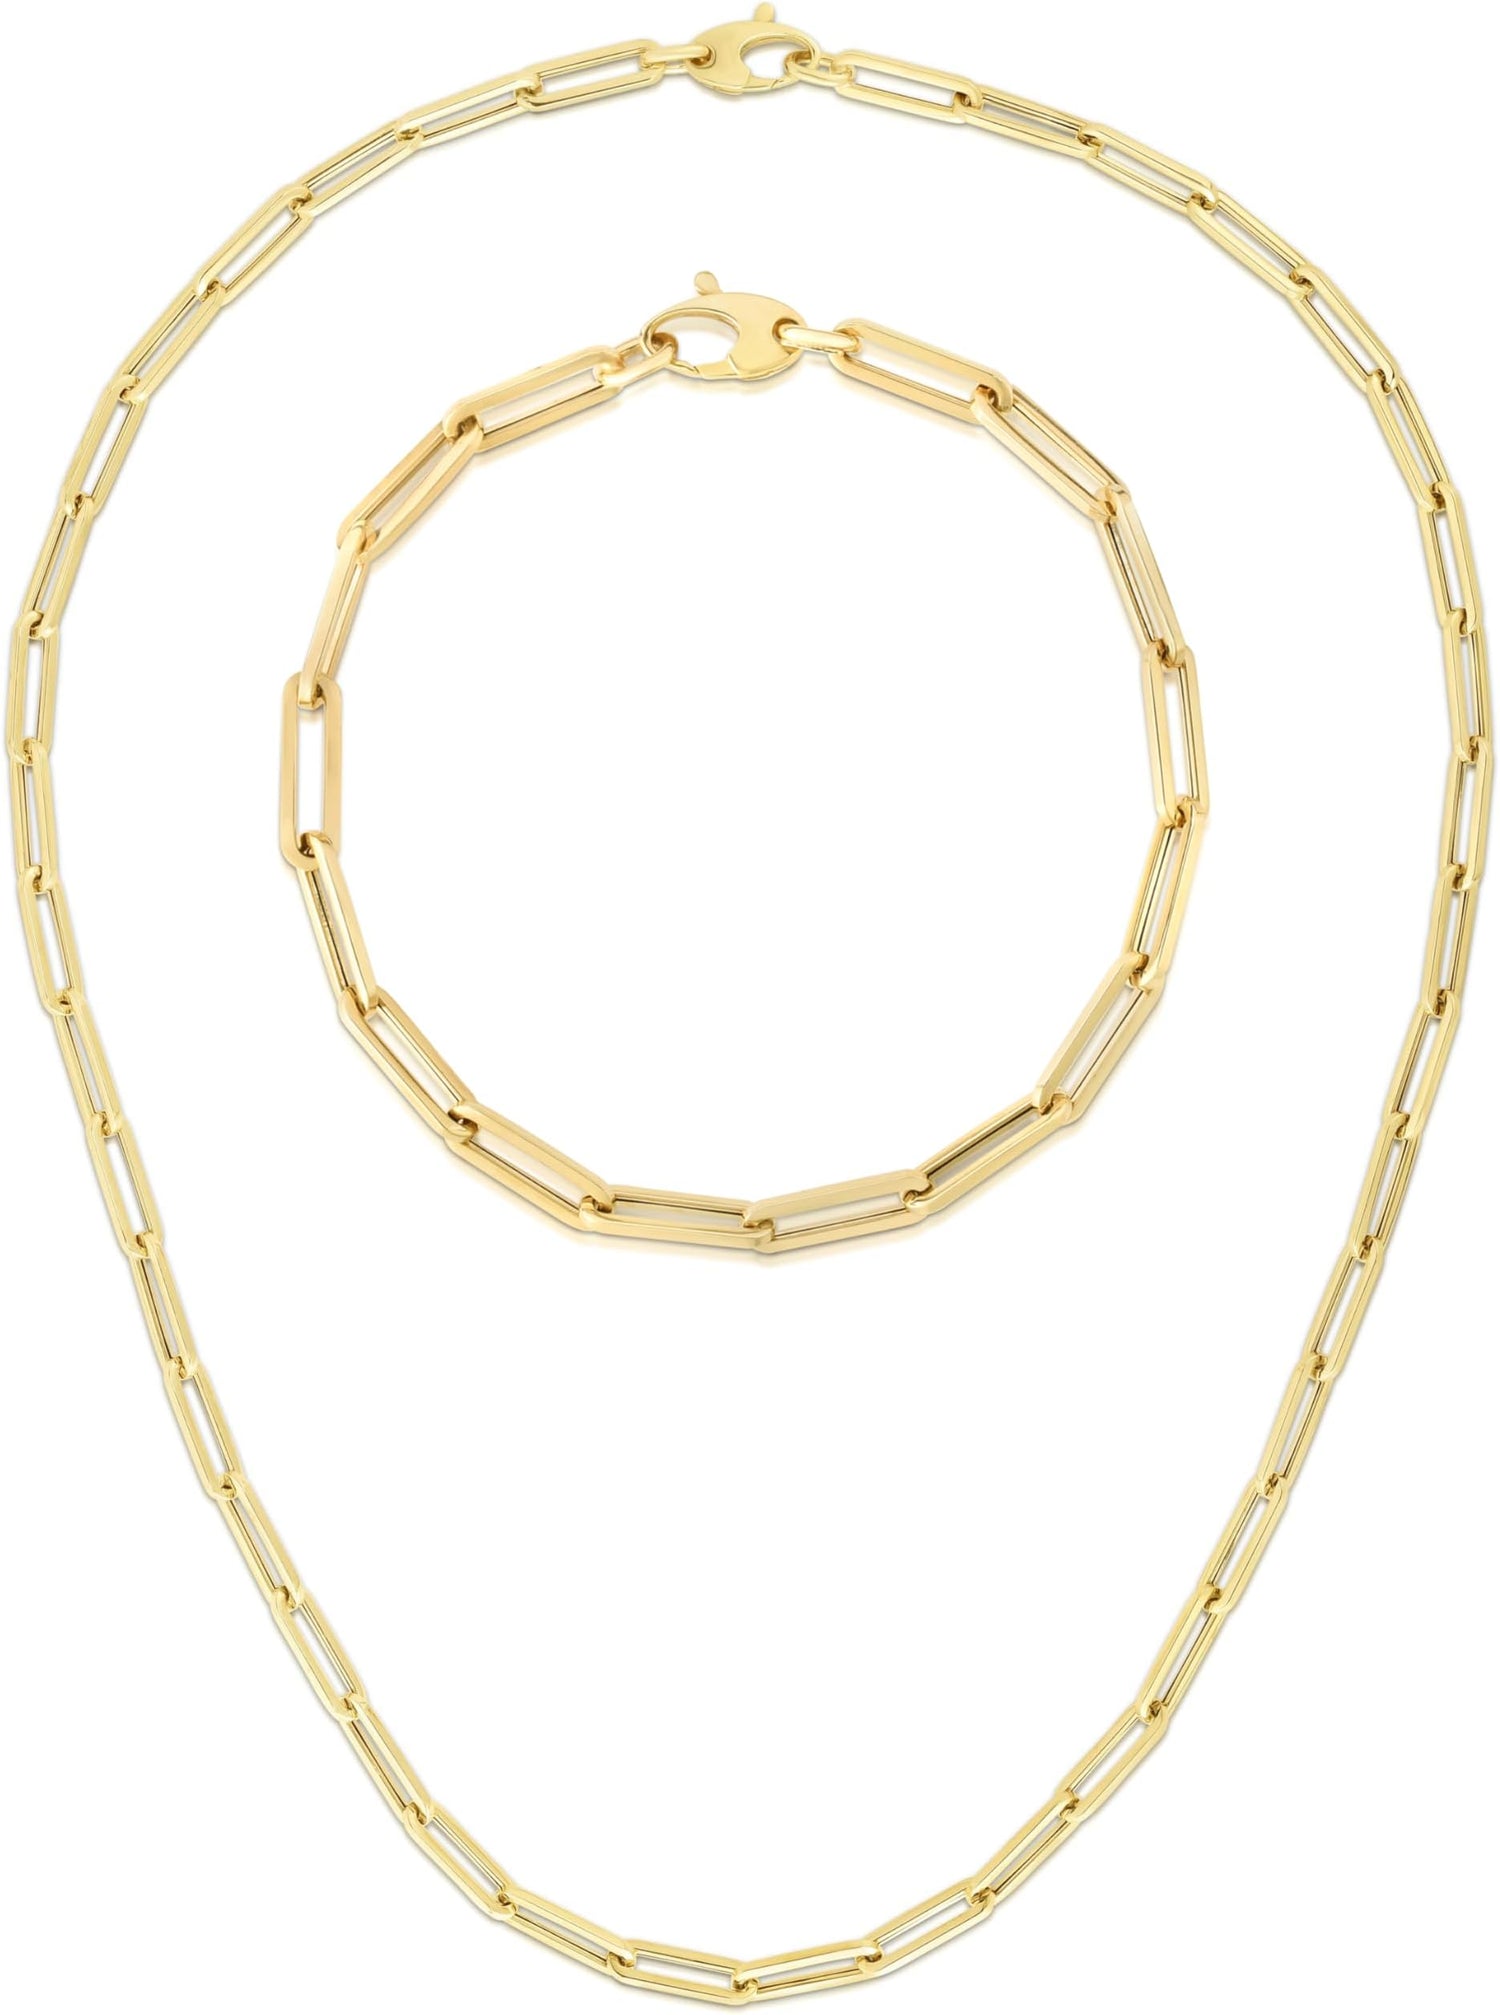 14k Yellow Gold 4.2mm Hollow Paperclip Link Chain Necklace and Bracelet Set